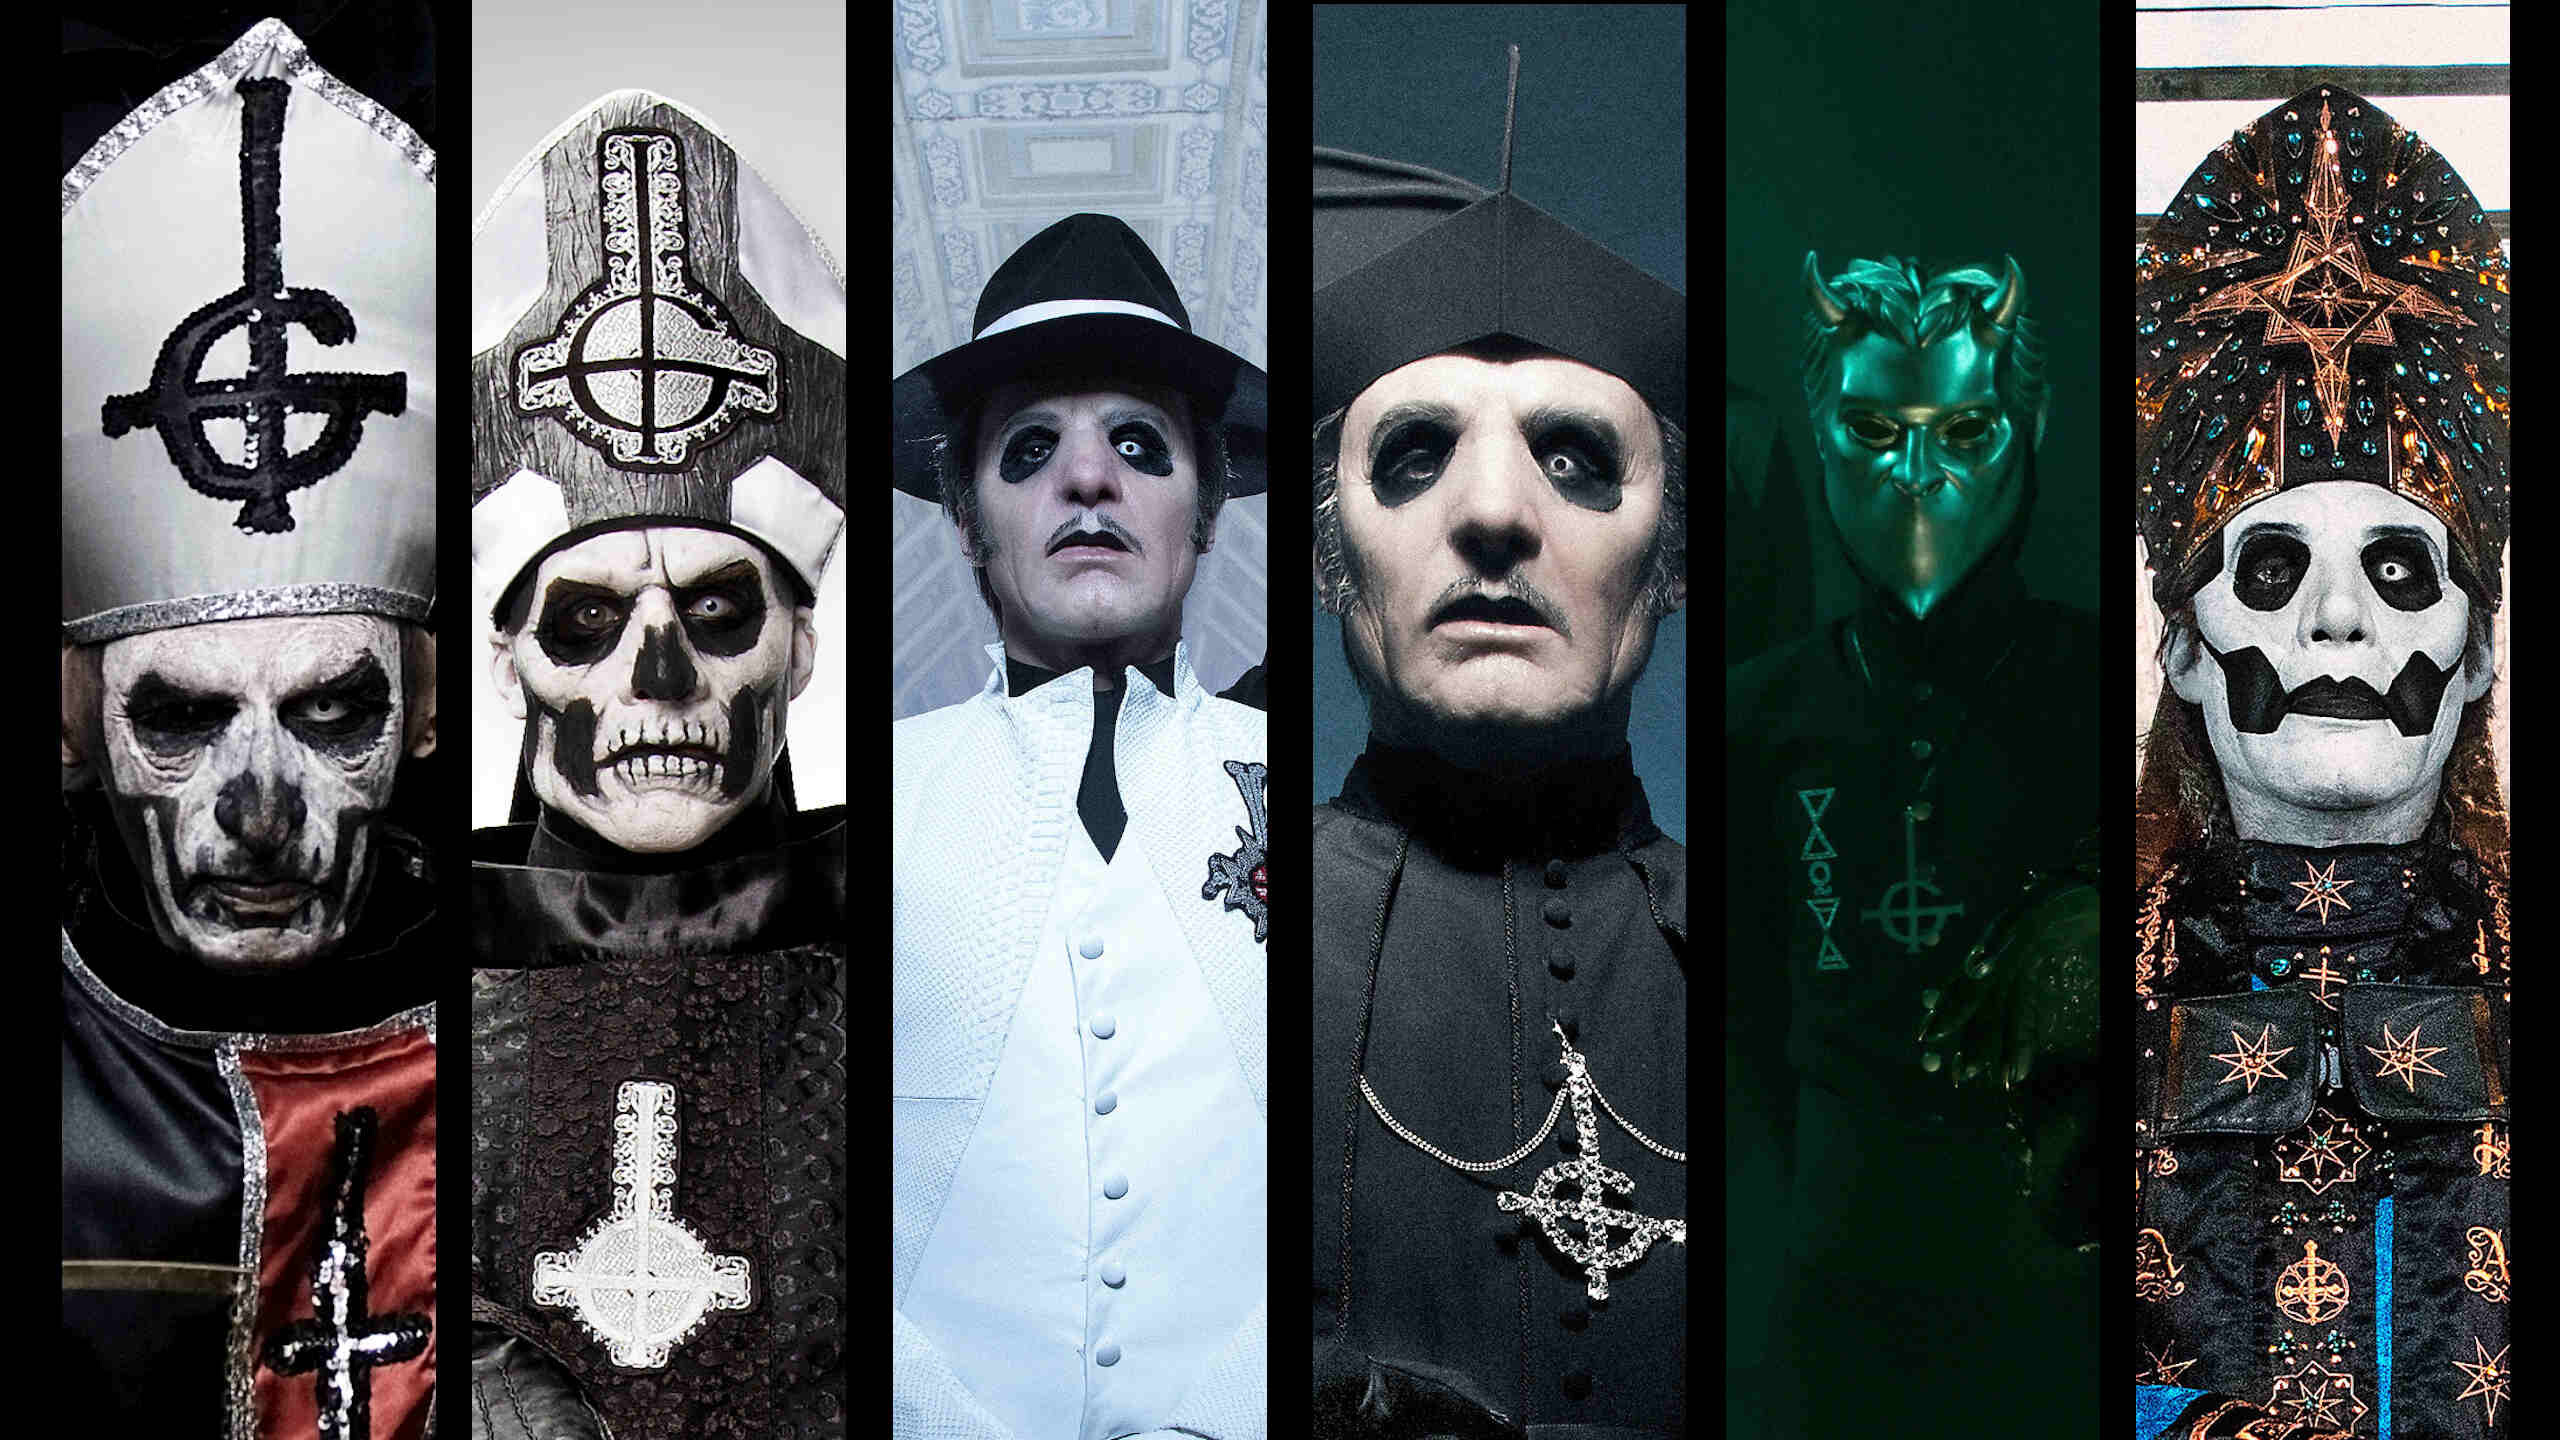 Ghost (Band): A member of the Group of Nameless Ghouls, A Ghoul Writer, Cardinal Copia. 2560x1440 HD Background.